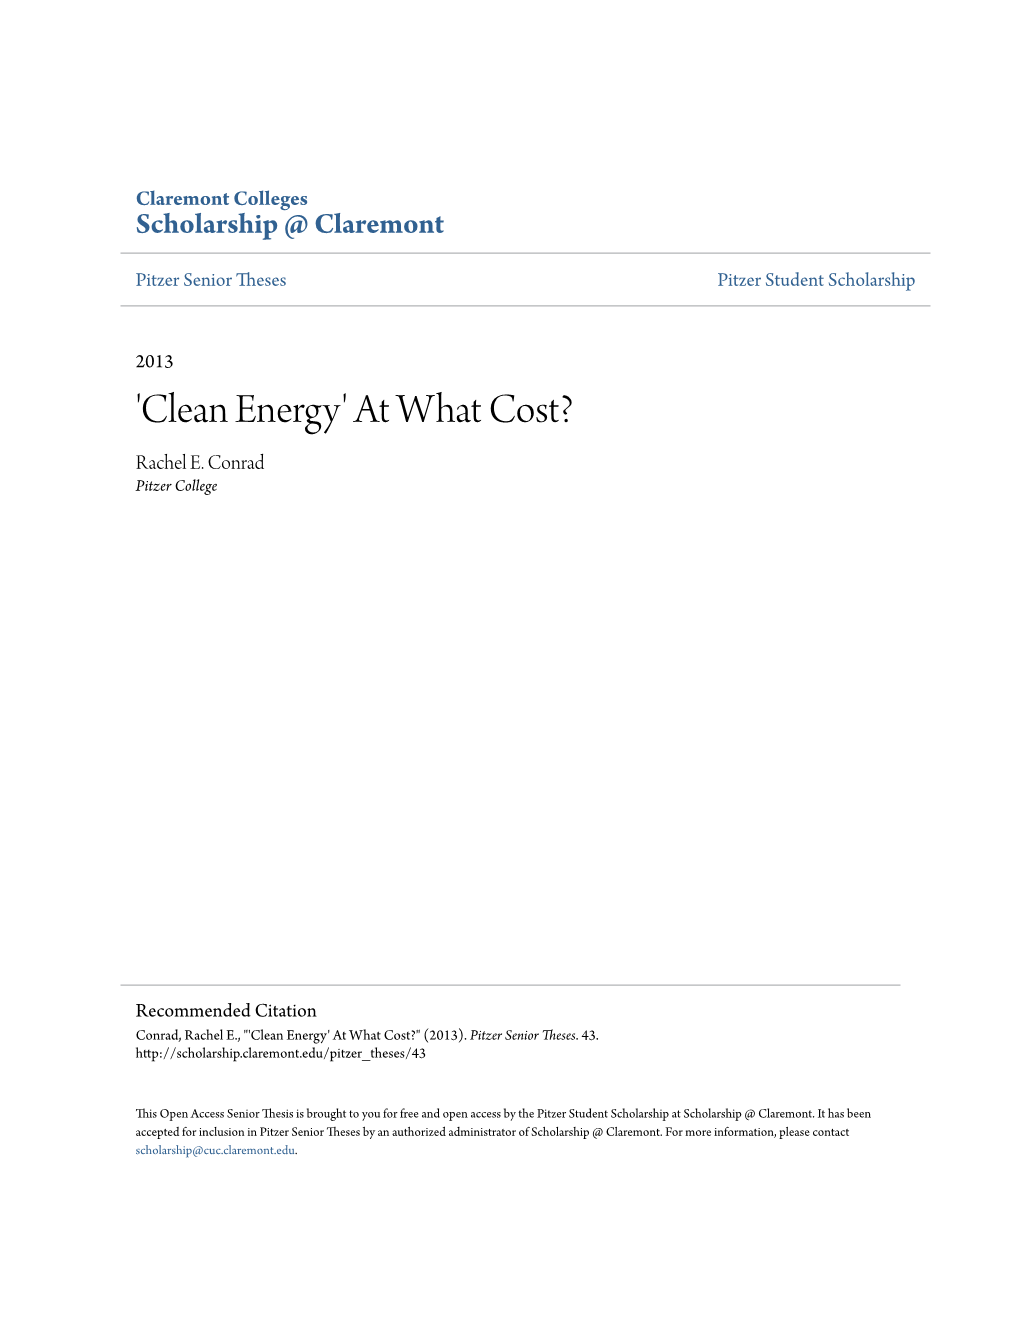 'Clean Energy' at What Cost? Rachel E